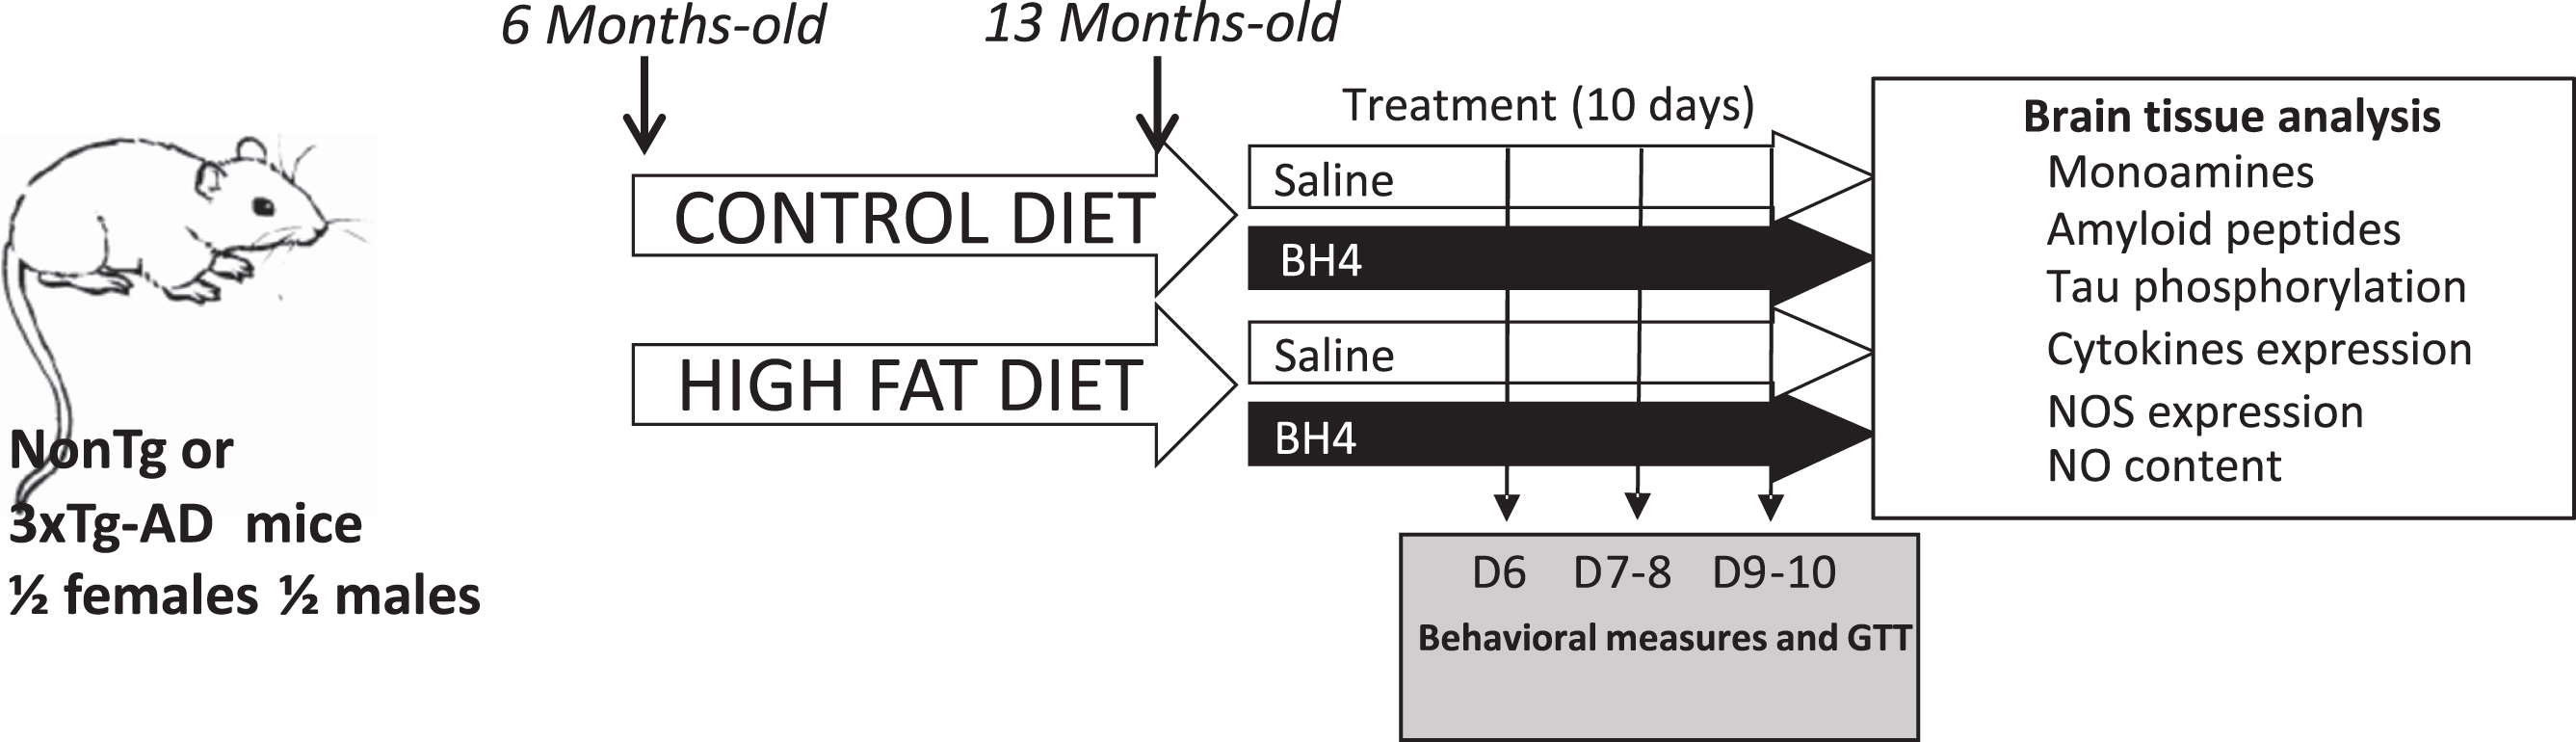 Experimental design. Non-transgenic mice (NonTg) and triple-transgenic mice (3xTg-AD) mice were fed from the age of 6 months a control (CD) or a high-fat diet (HFD) for 7 months. BH4 treatment (10 days, 15 mg/kg/day) was administered intra-peritoneally to mice at the age of 13 months. Behavioral (Open Field, Object Recognition) and metabolic (Glucose Tolerance Test) tests were performed between the 6th and 10th days of BH4 administration. On the day following the last injection, mice were sacrificed, and brain tissues were collected. All group (n = 11–17) were composed of males and females in equal proportion.